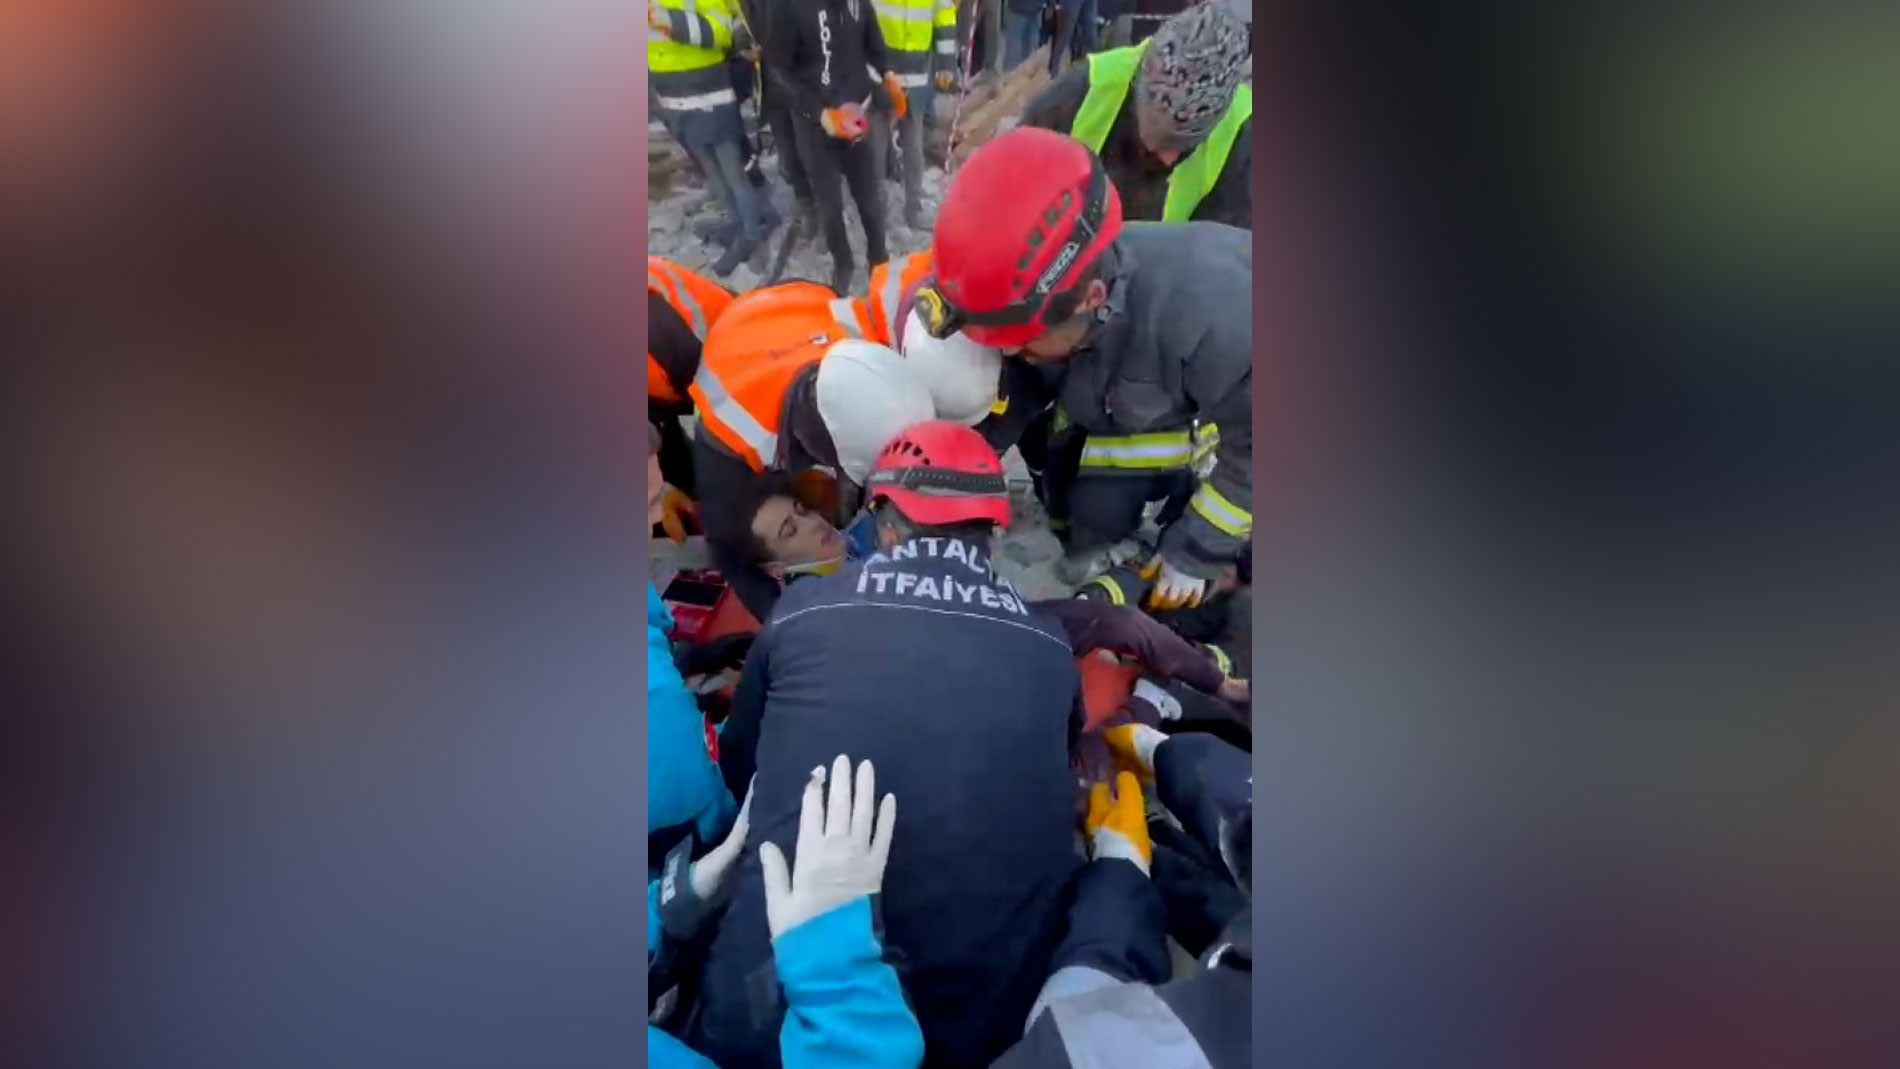 Fuat Camber is helped by rescuers after being pulled from the rubble.